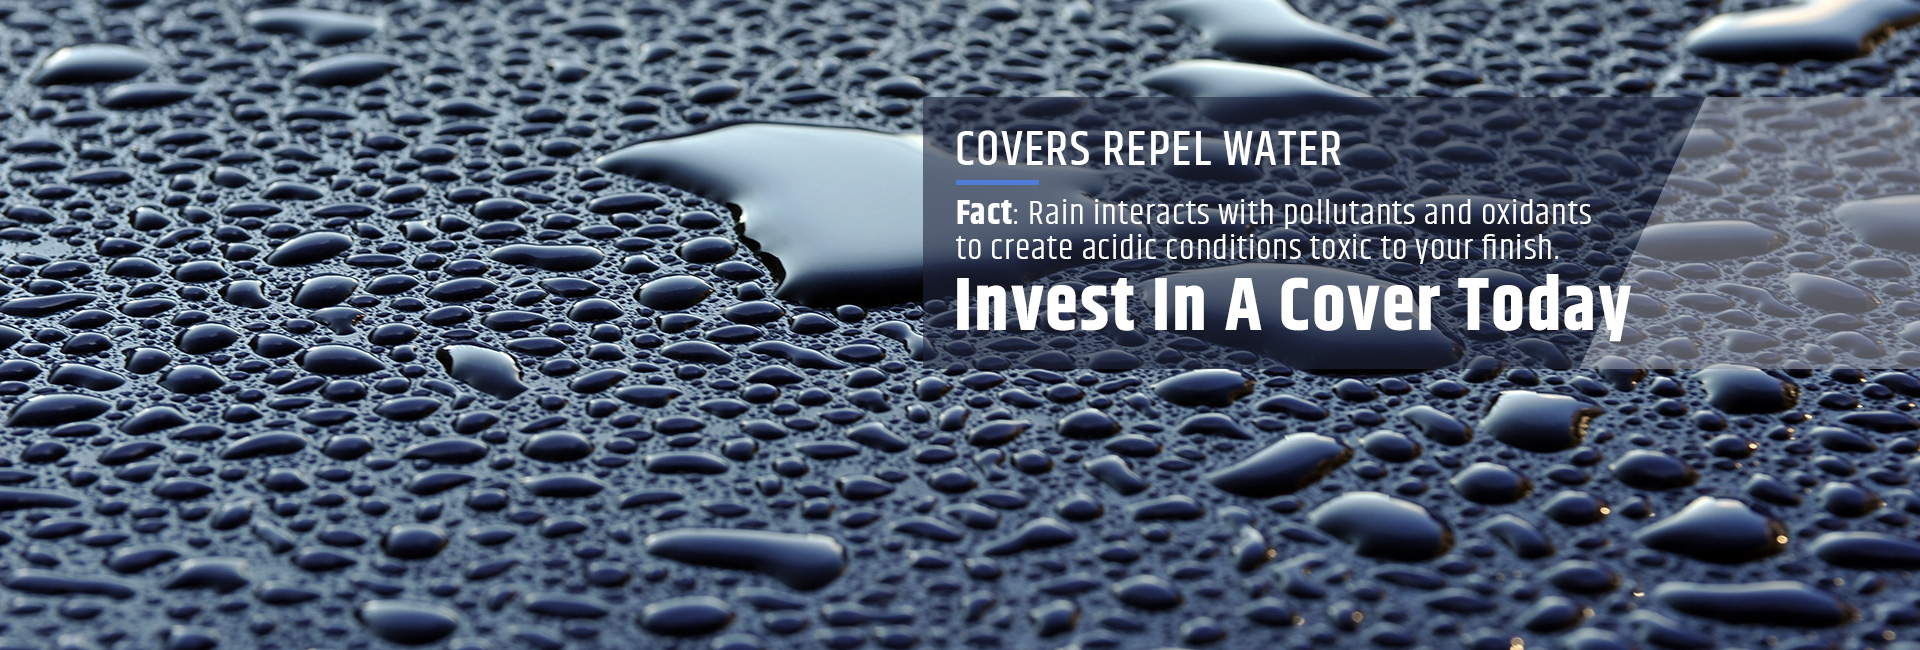 Covers repel water